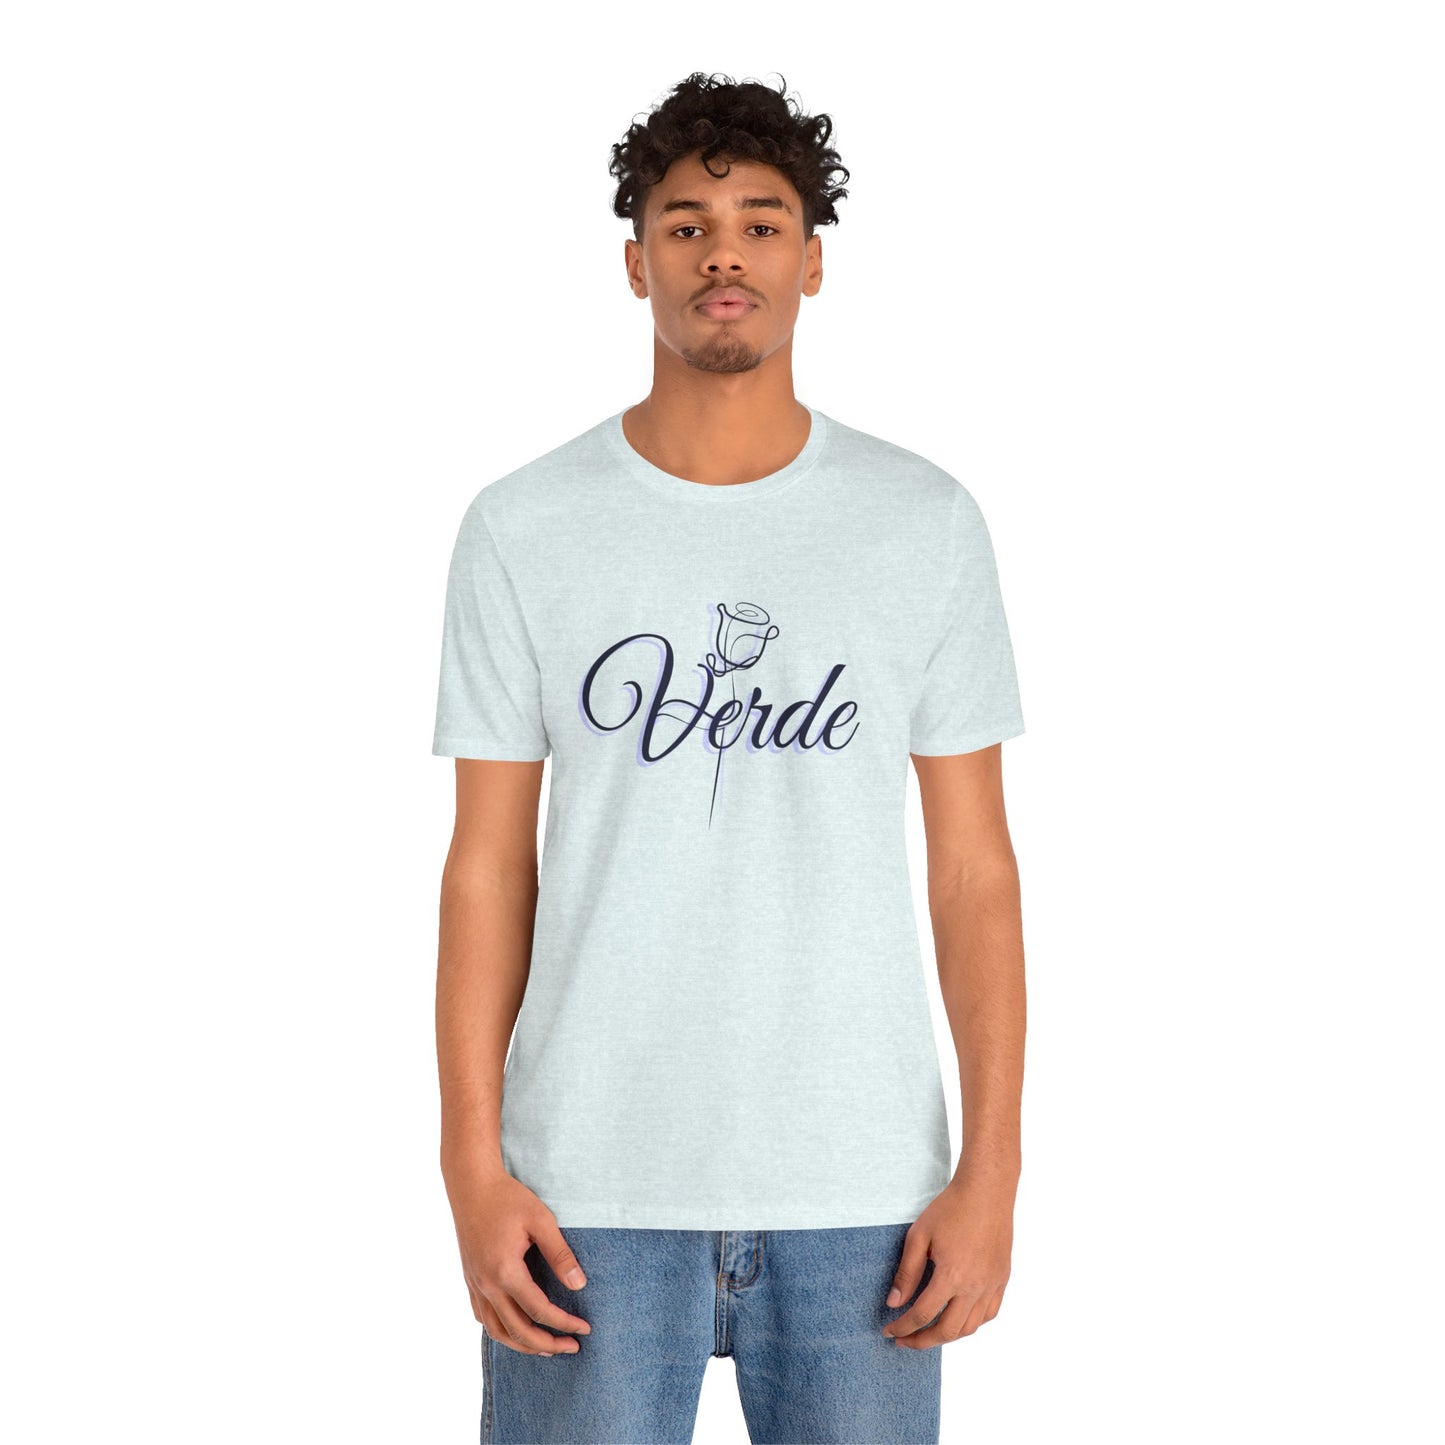 verde signature rose tshirt heather ice blue front on